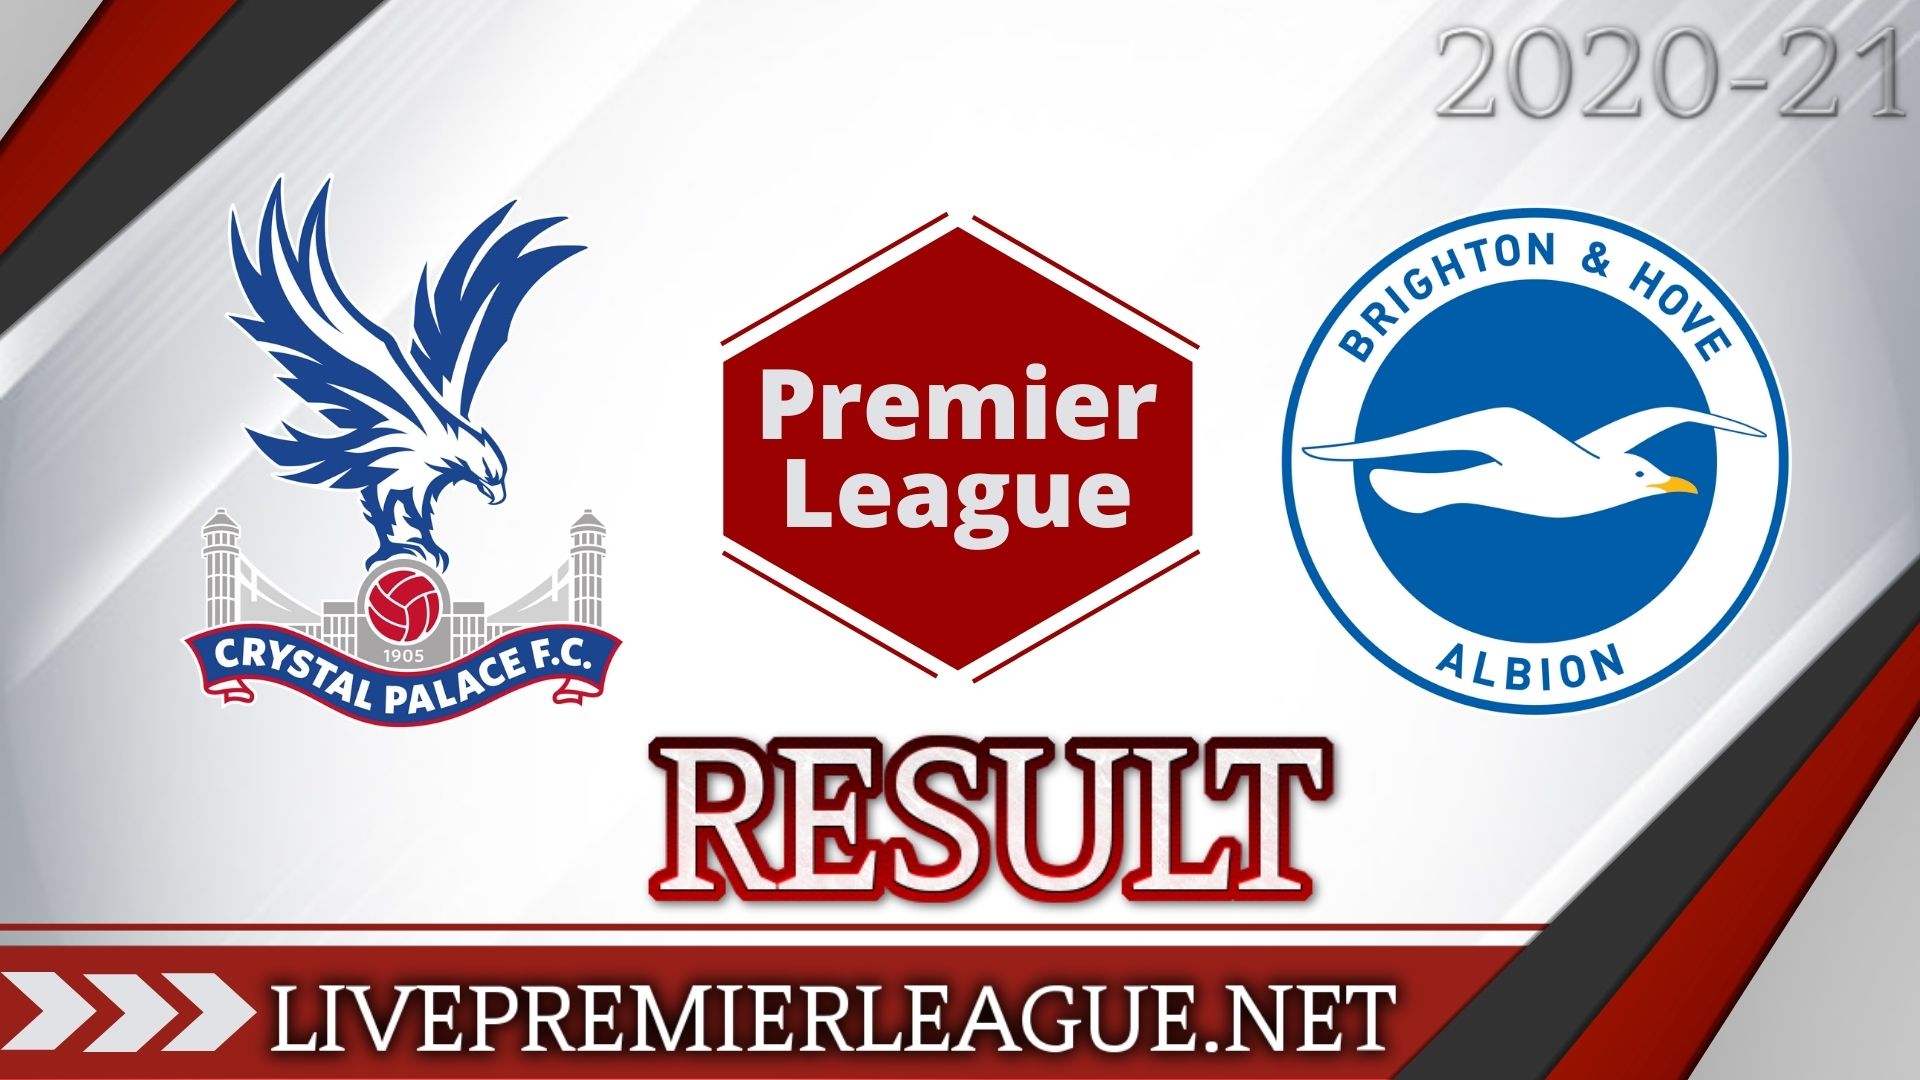 Crystal Palace Vs Brighton And Hove Albion | Week 5 Result 2020